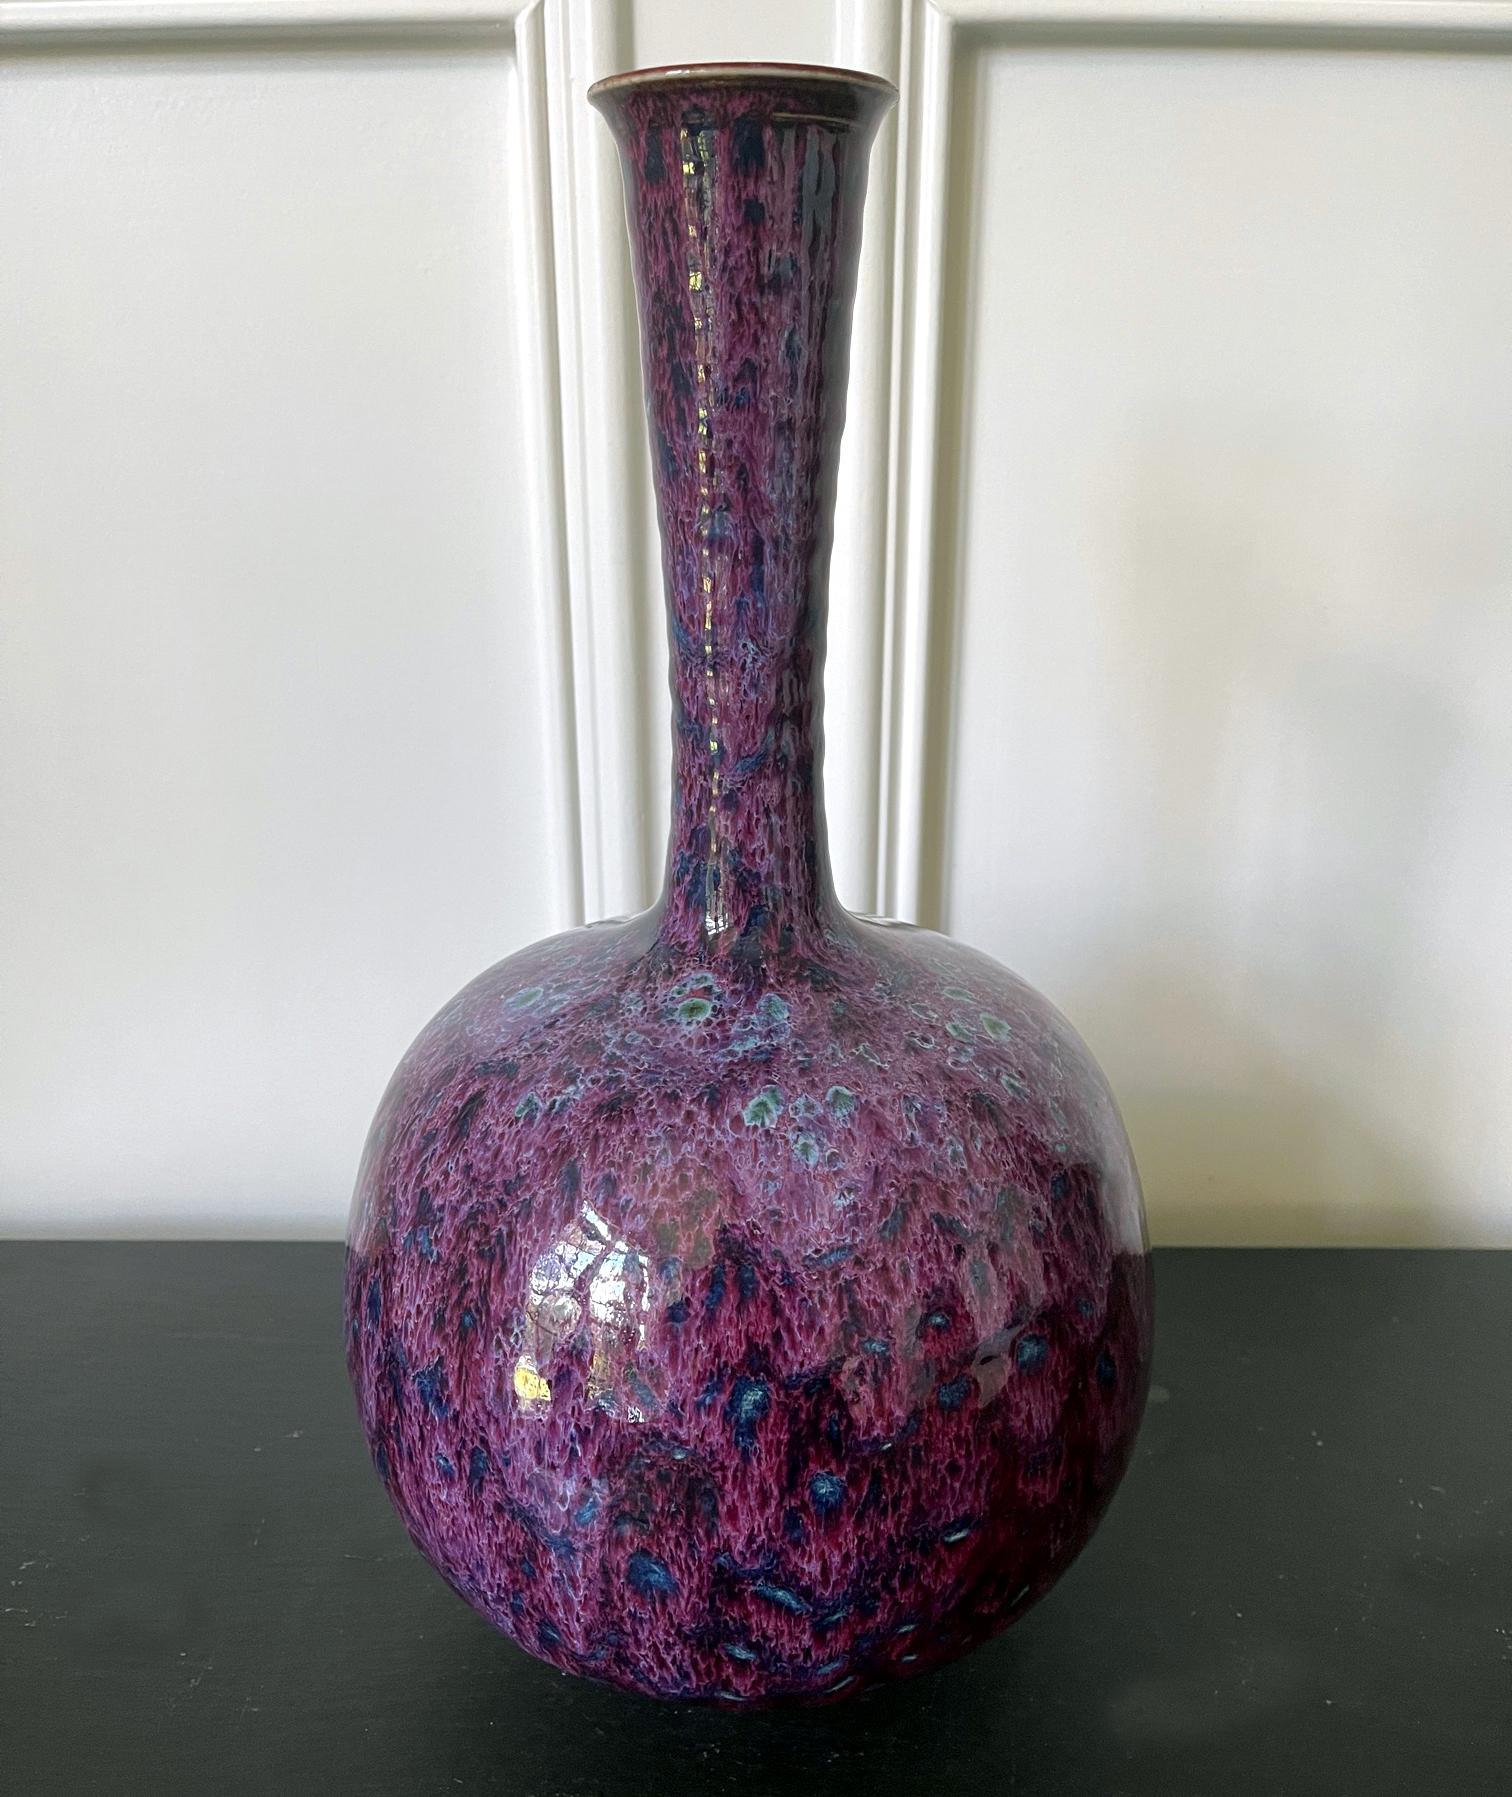 An impressively large ceramic vase with a bulbous body and a long coiled neck by potter Brother Thomas Bezanson (1929-2007). The minimalist modern form might be distilled from the classic Chinese garlic bottle. The high glossy surface displays a